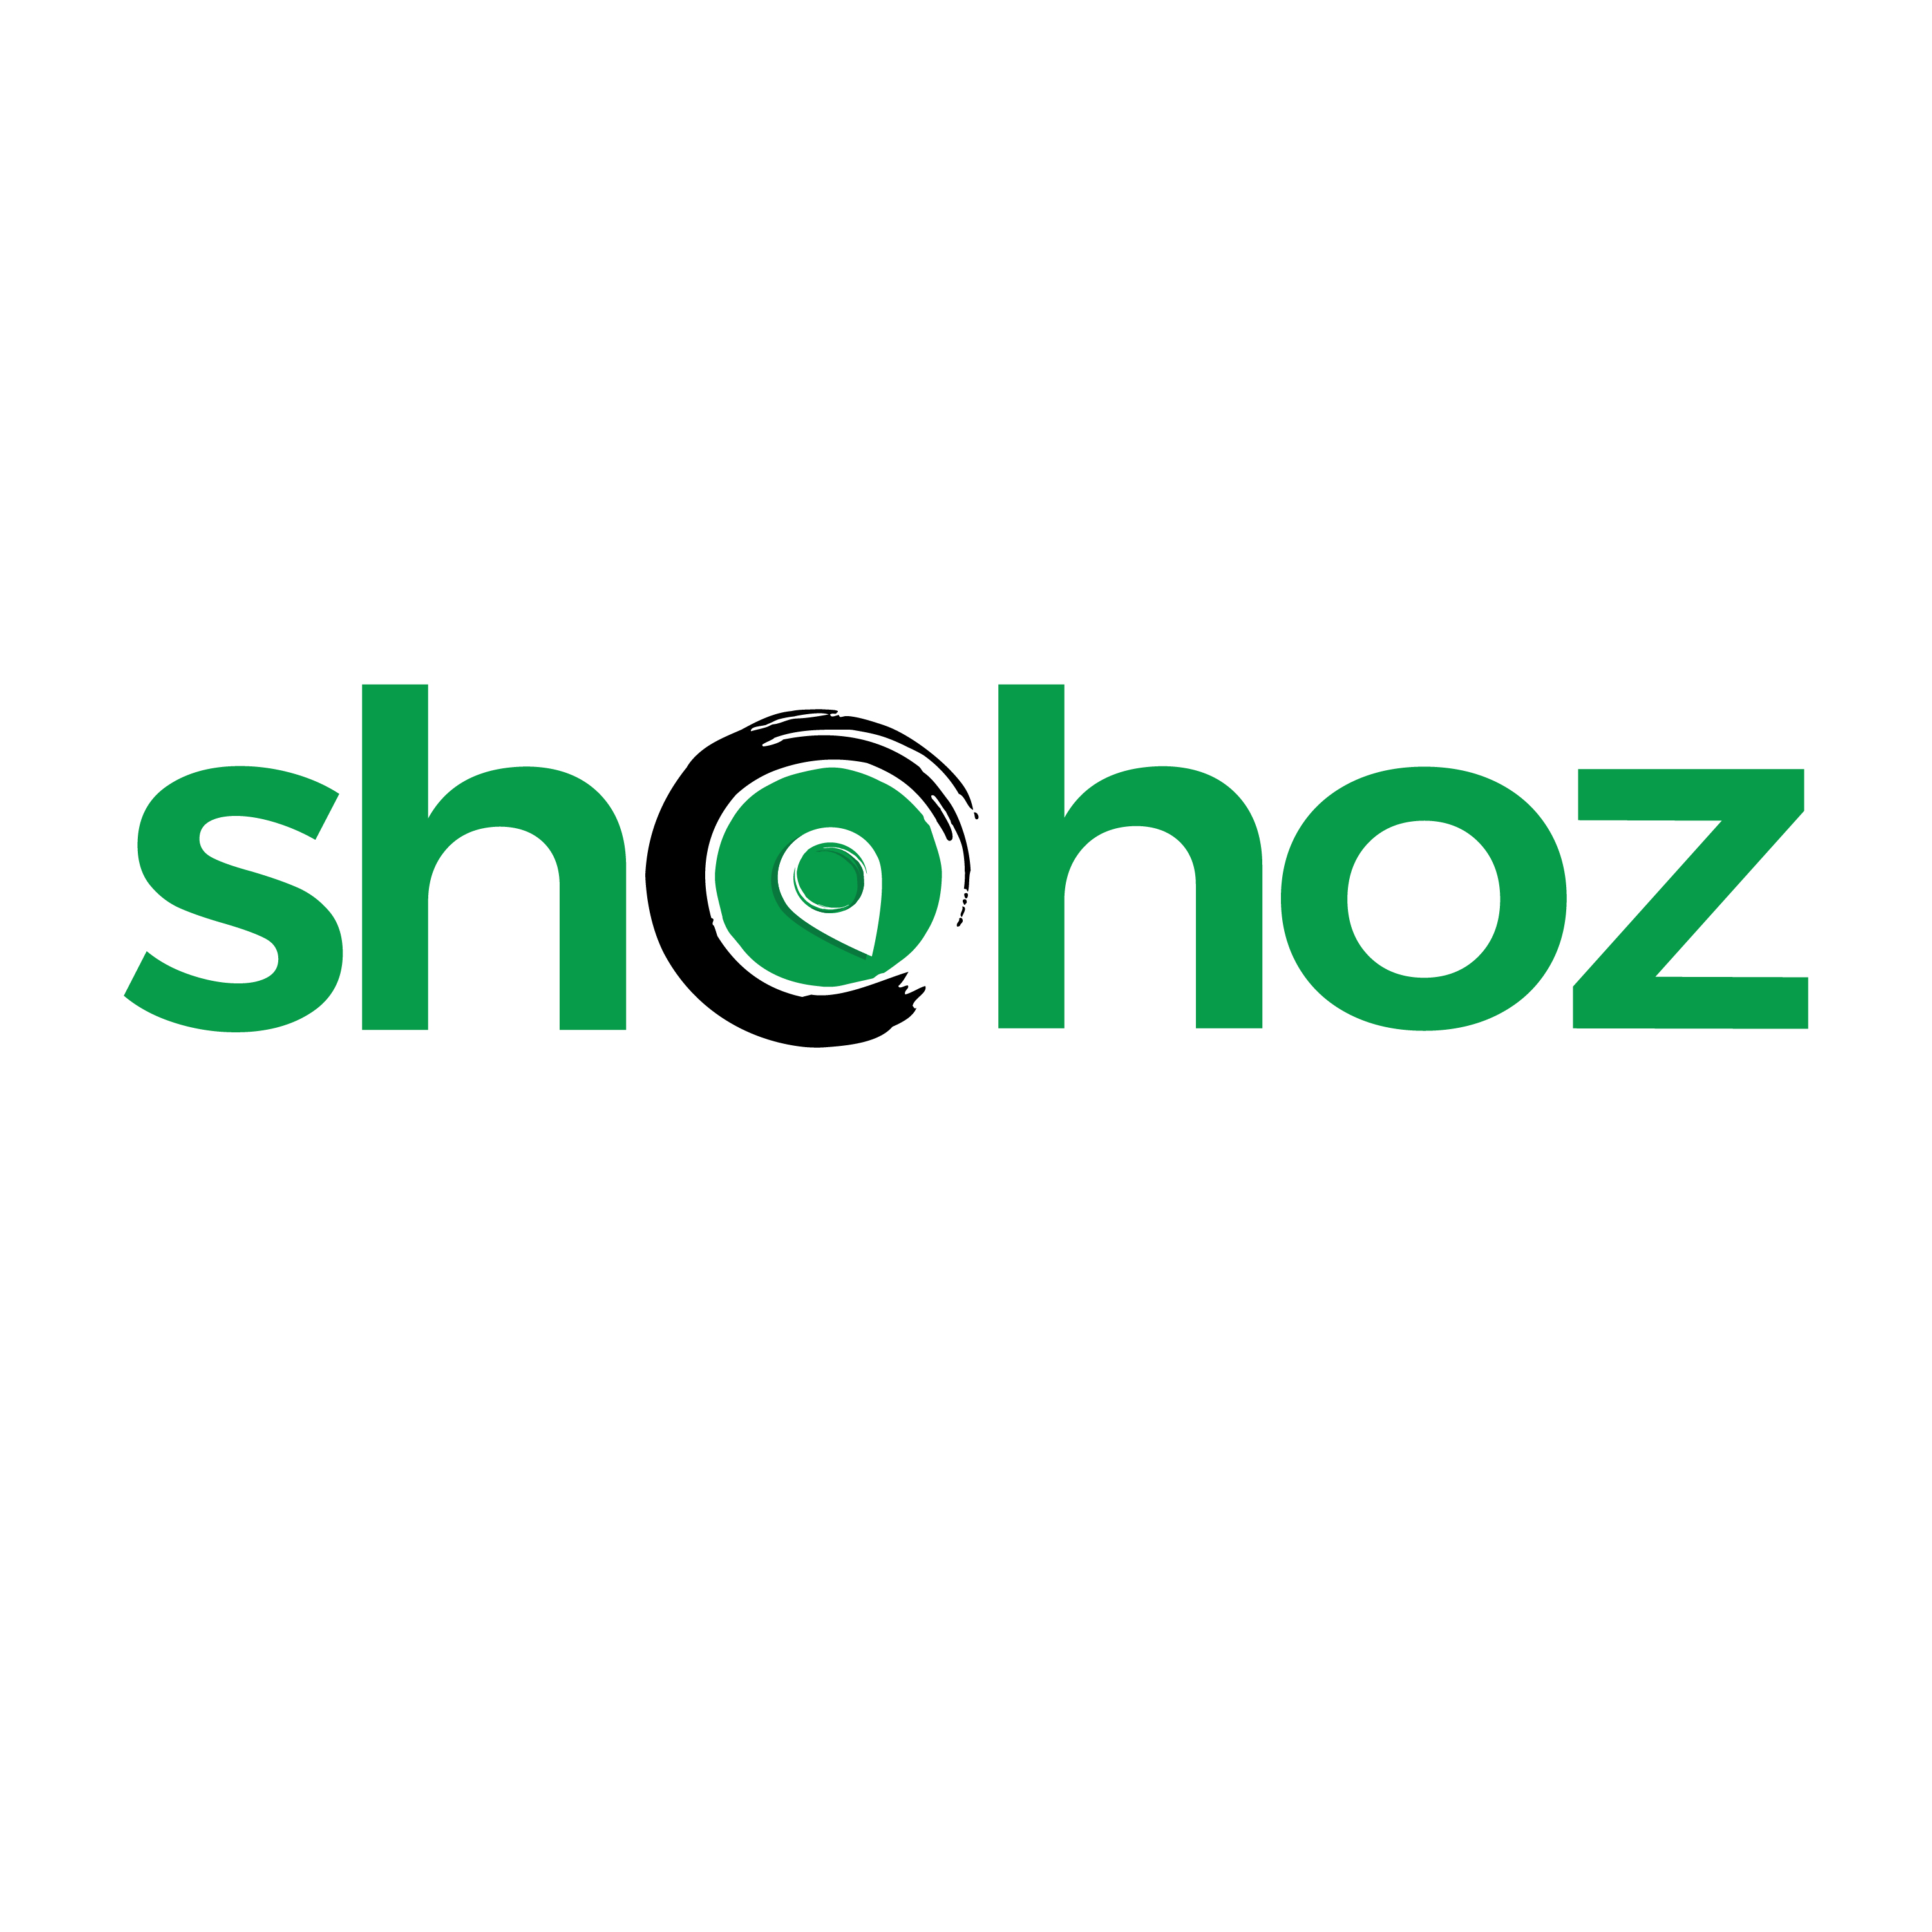 Shohoz: The Largest Online Destination in the Country